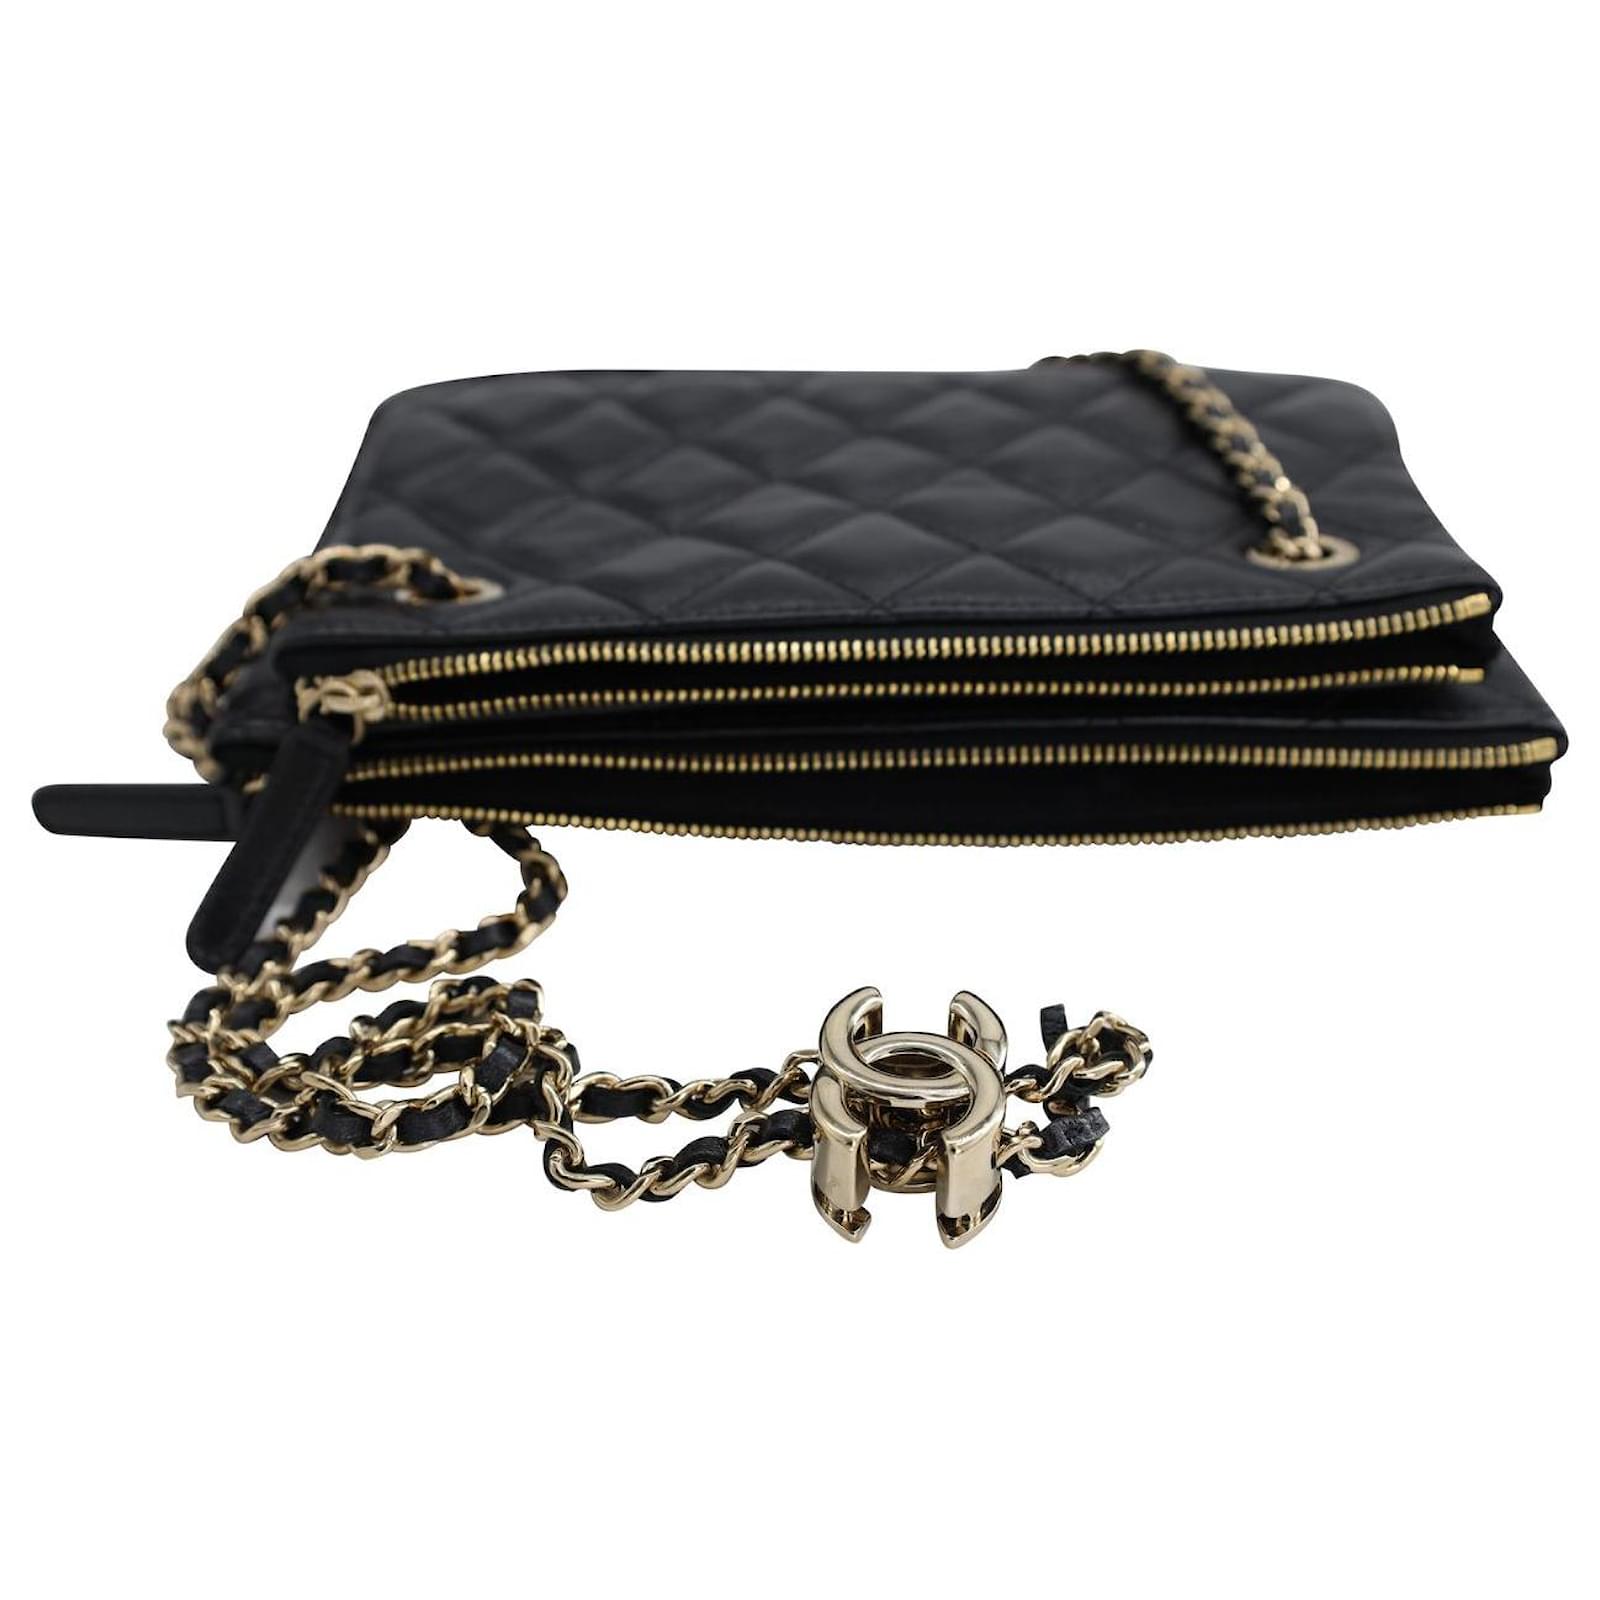 New 18P Chanel Black CC Double Zip Clutch Wallet on Chain WOC